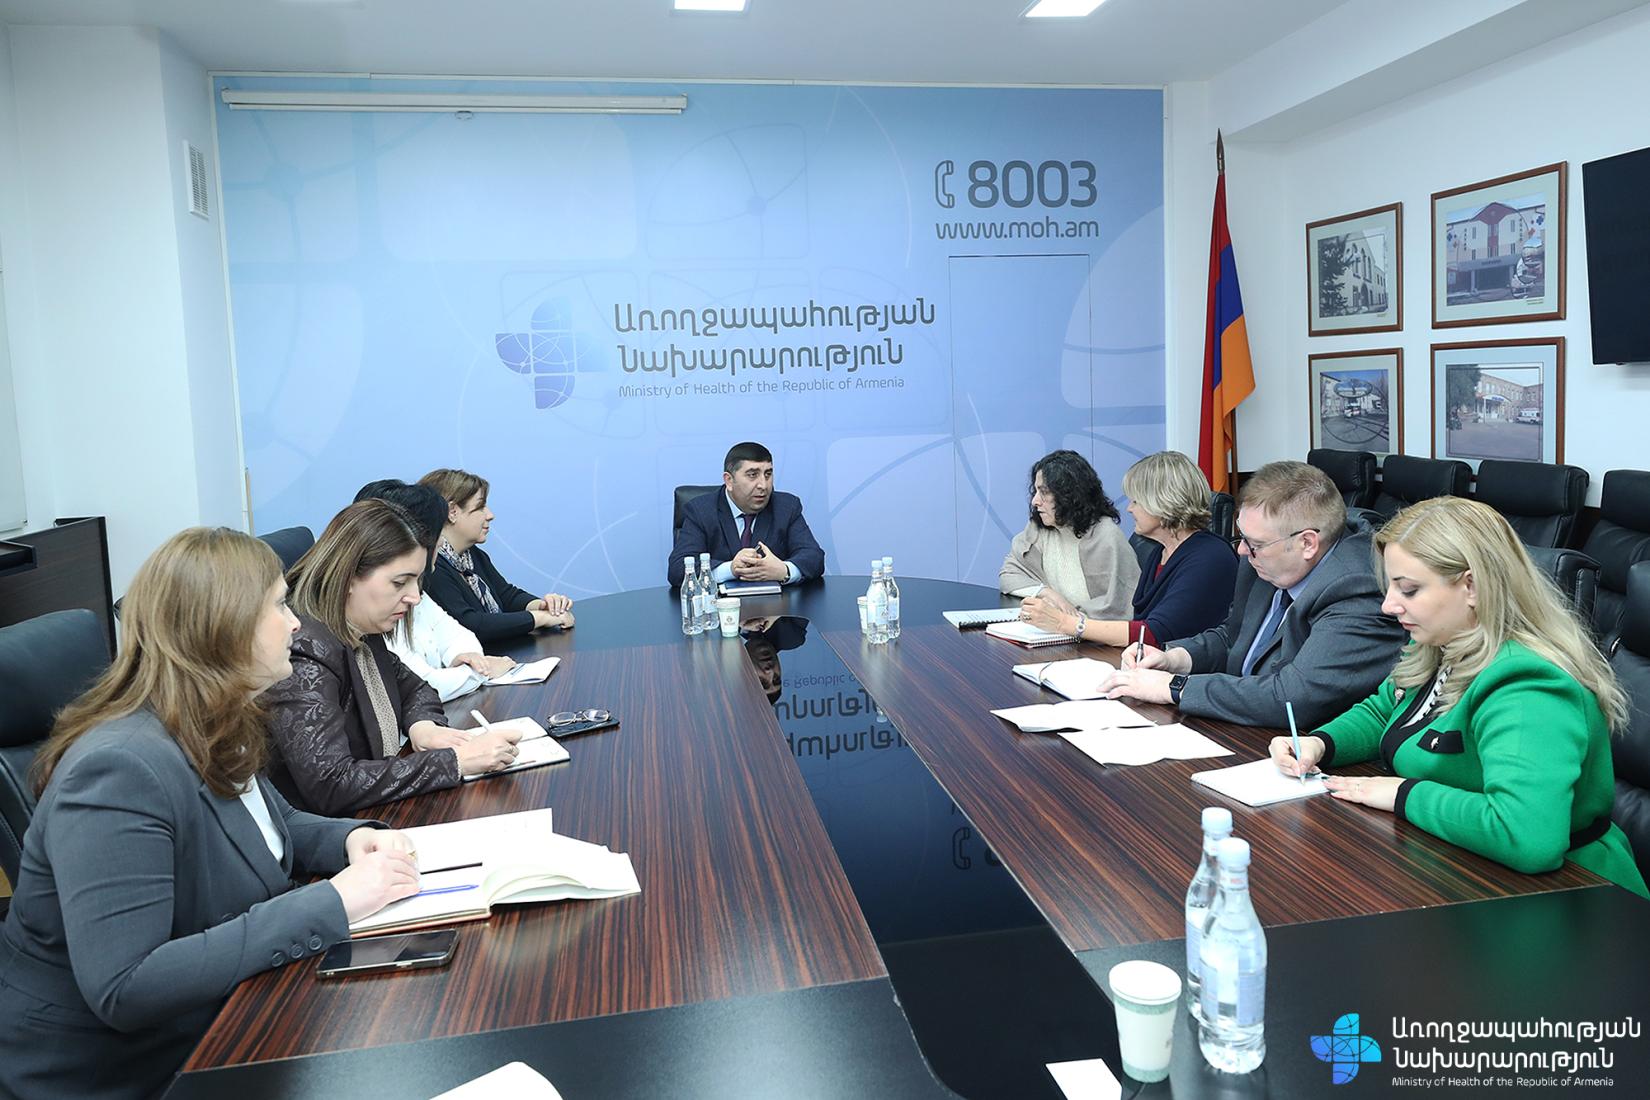 Deputy Minister of Health Armen Nazaryan received the WHO expert team. Eight experts during the discussion.